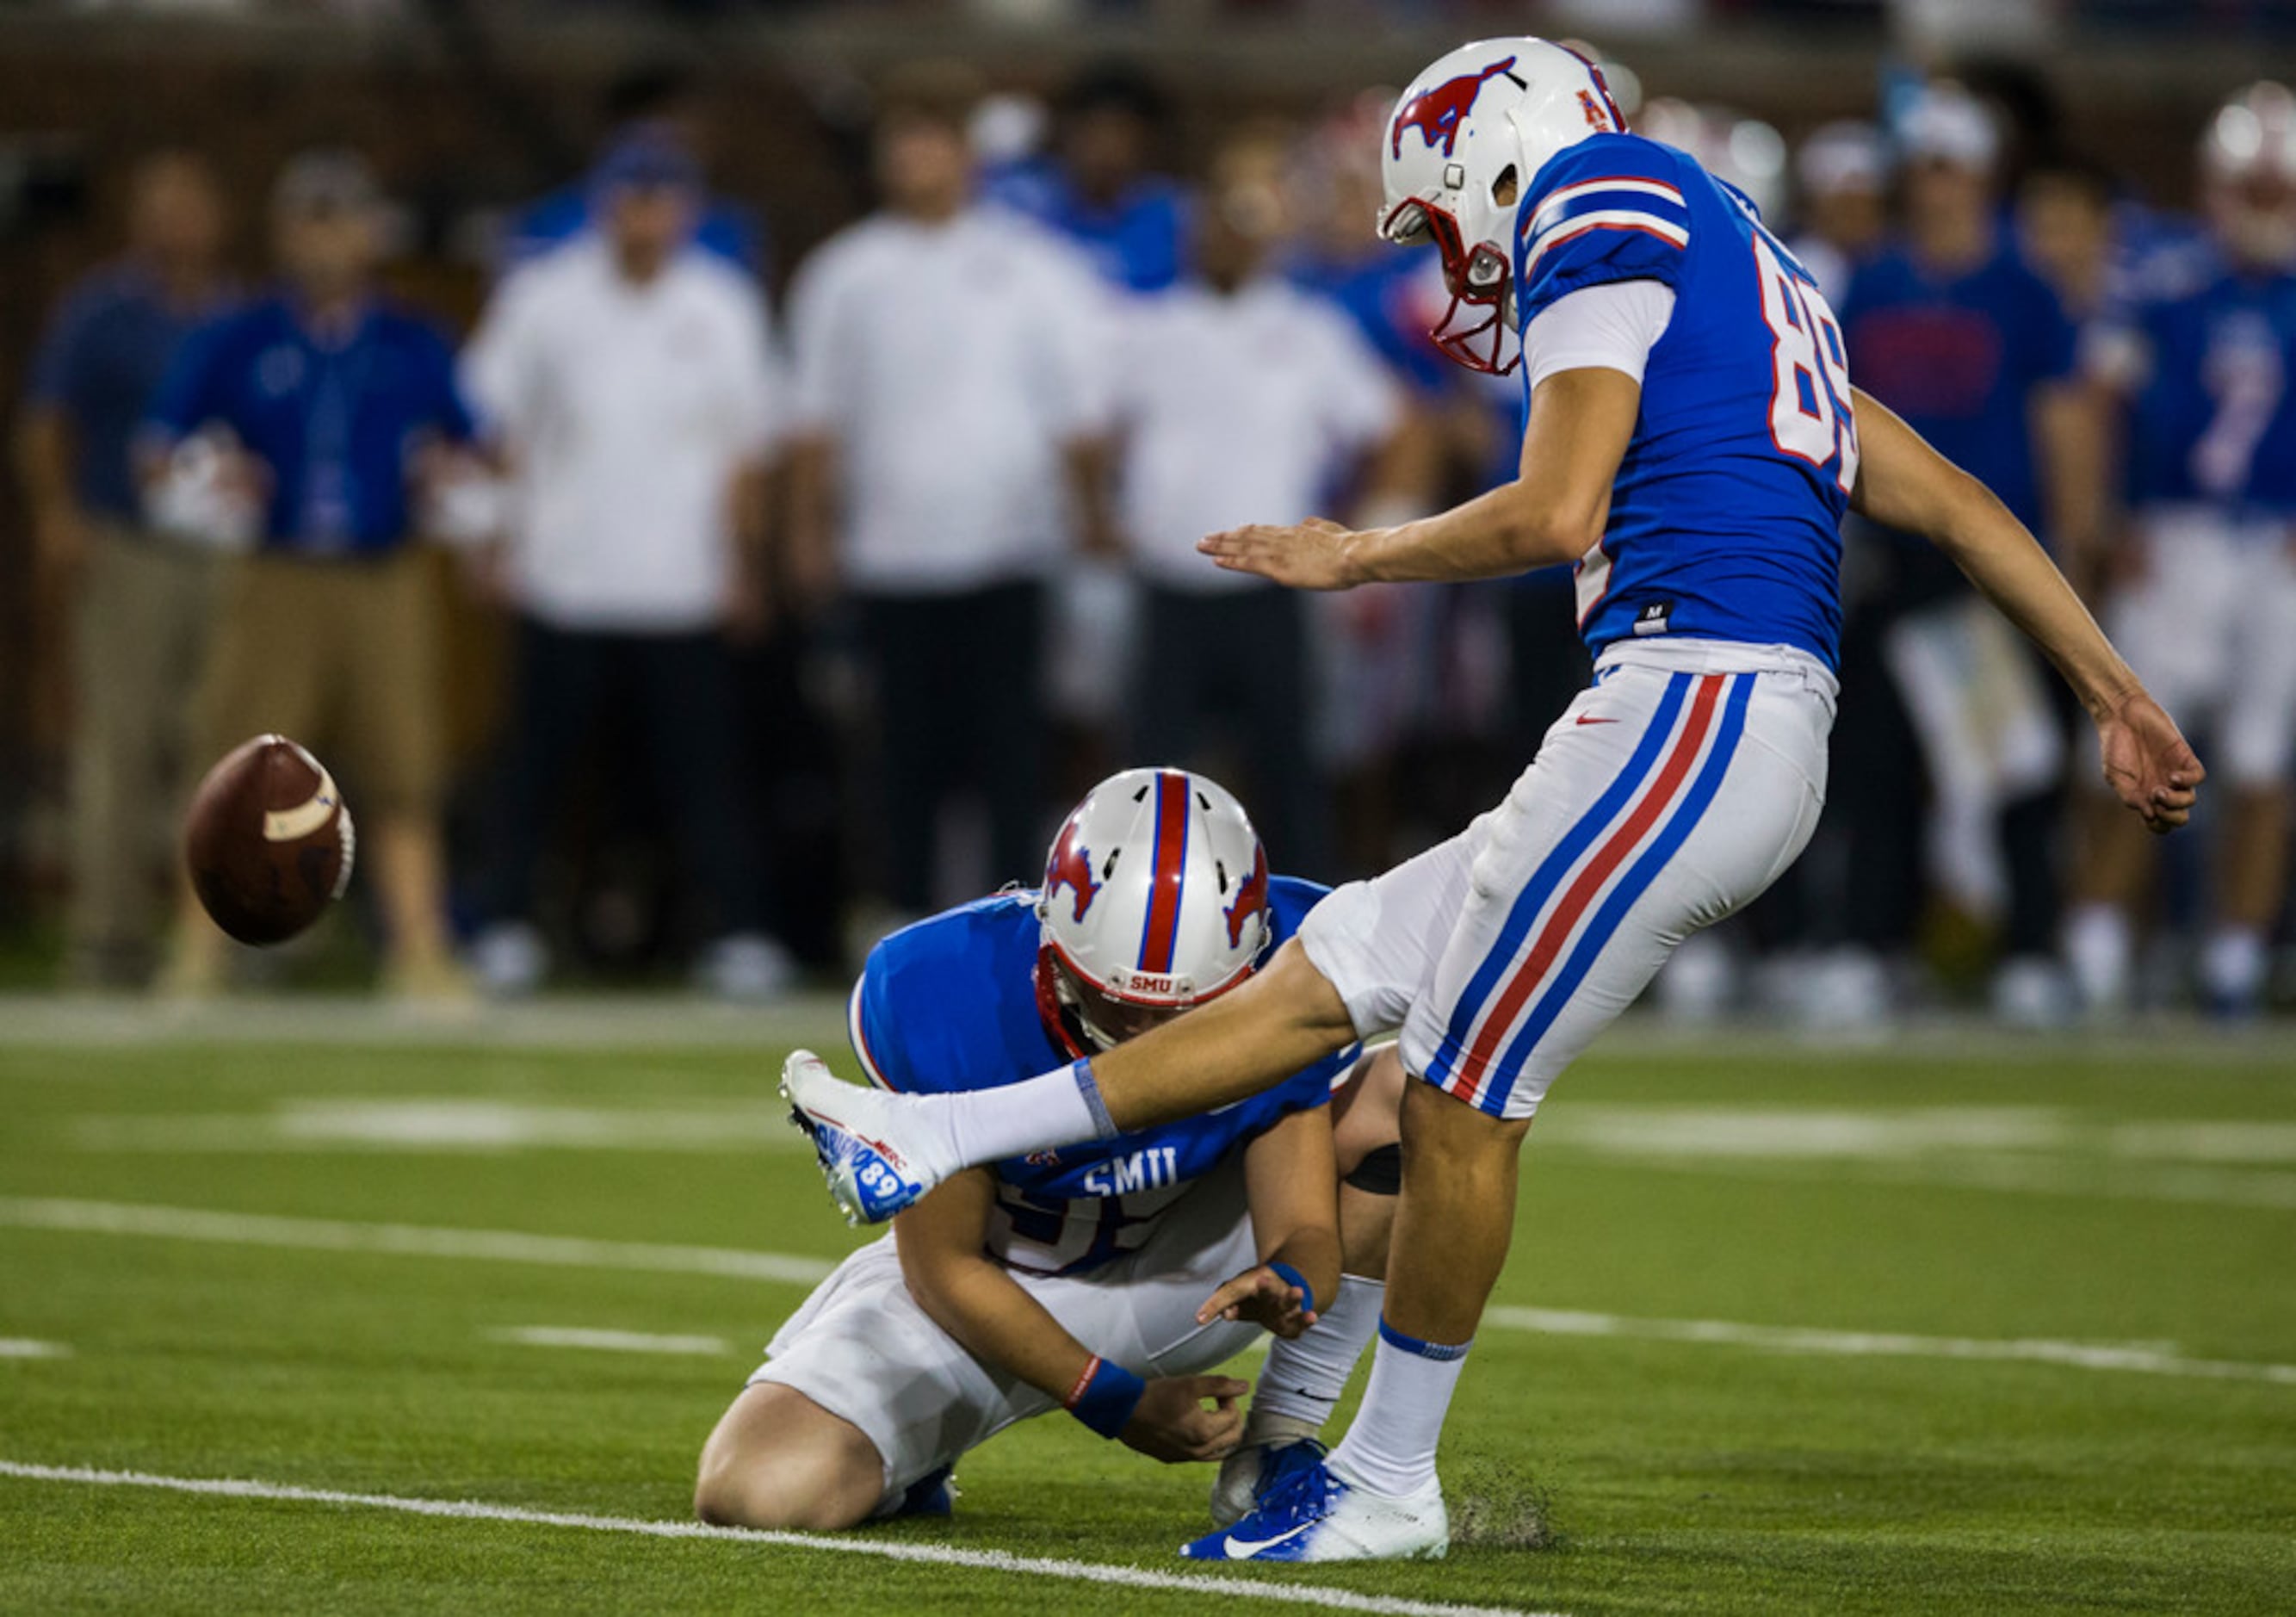 SMU Mustangs place kicker Kevin Robledo (89) kicks an extra point during the fourth quarter...